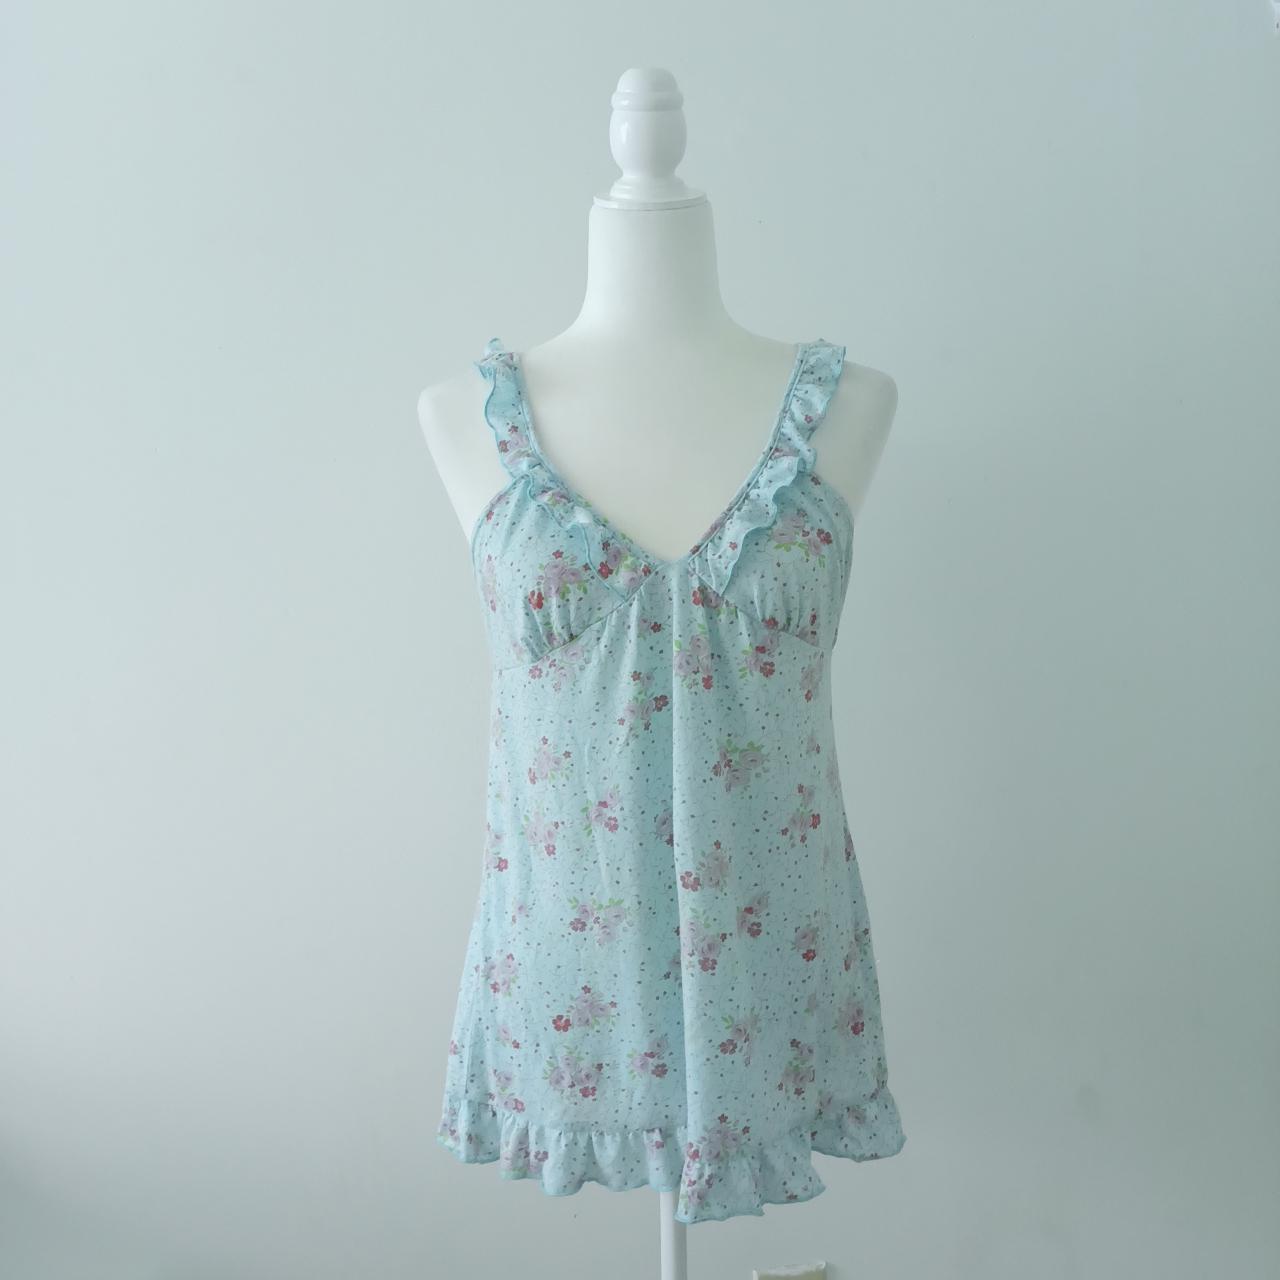 Product Image 1 - Cute babydoll from Charlotte Russe.